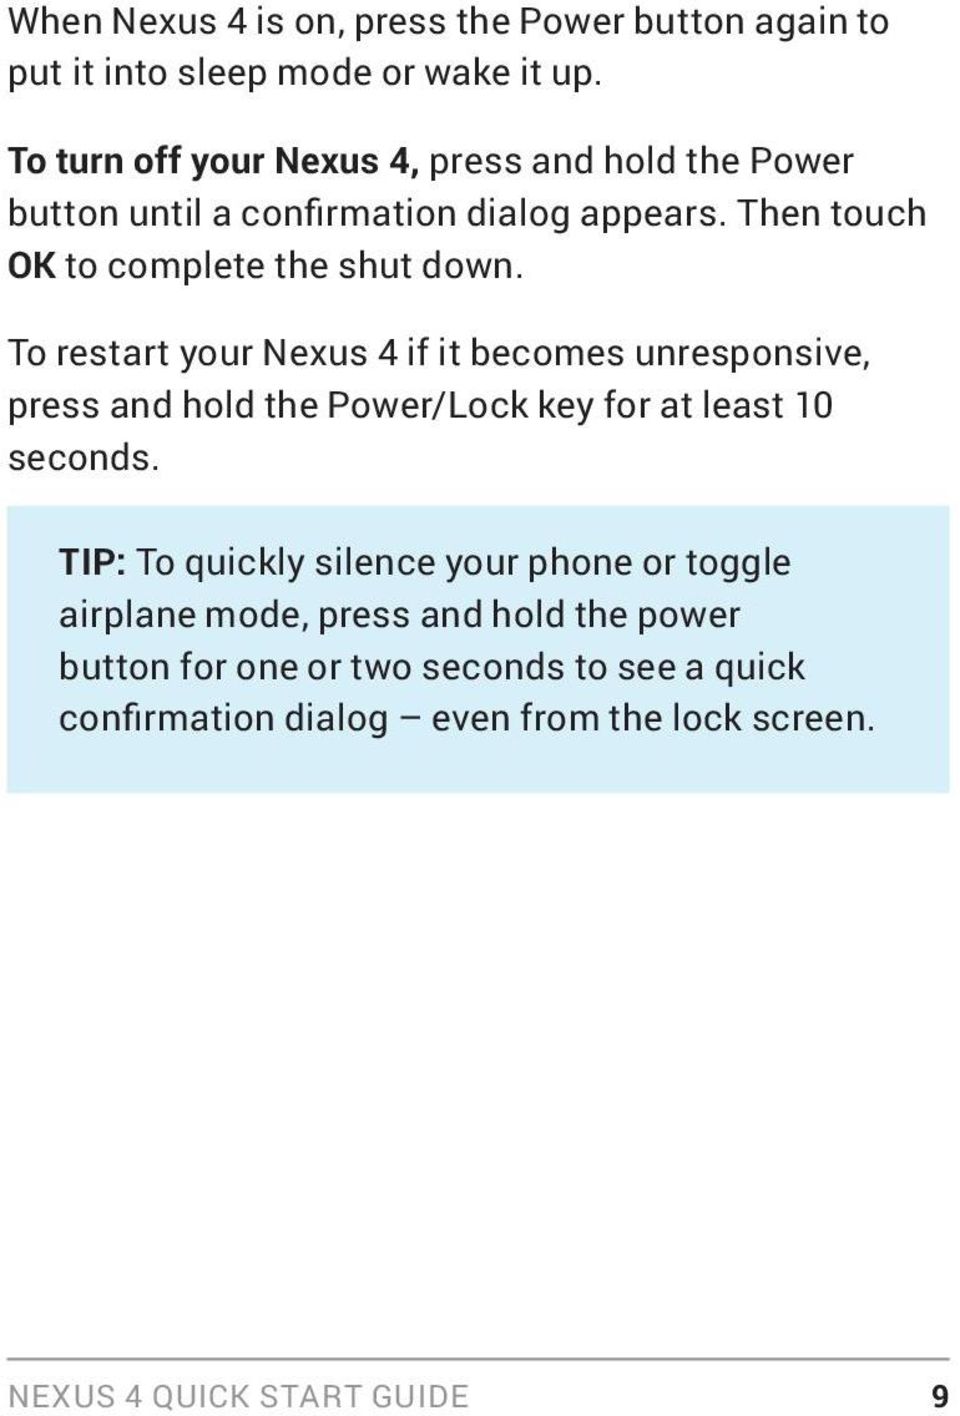 To restart your Nexus 4 if it becomes unresponsive, press and hold the Power/Lock key for at least 10 seconds.